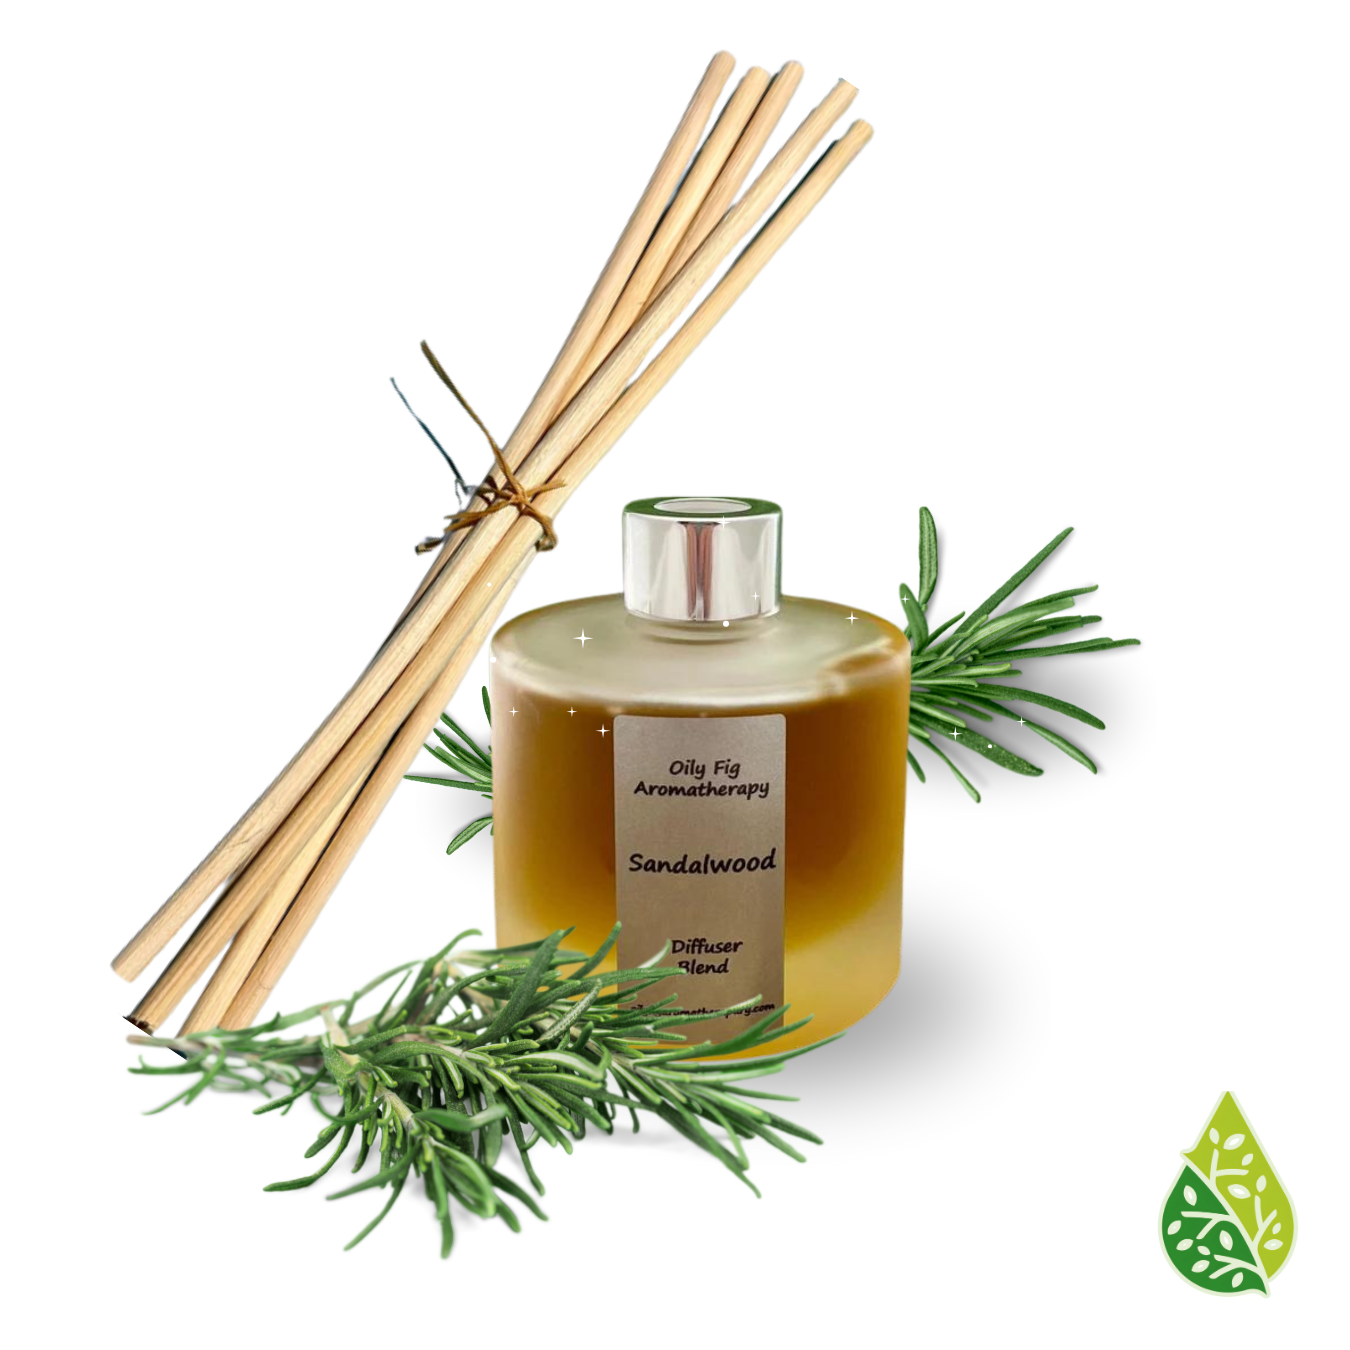 Serene sanctuary: Sandalwood reed diffuser embraces tranquility